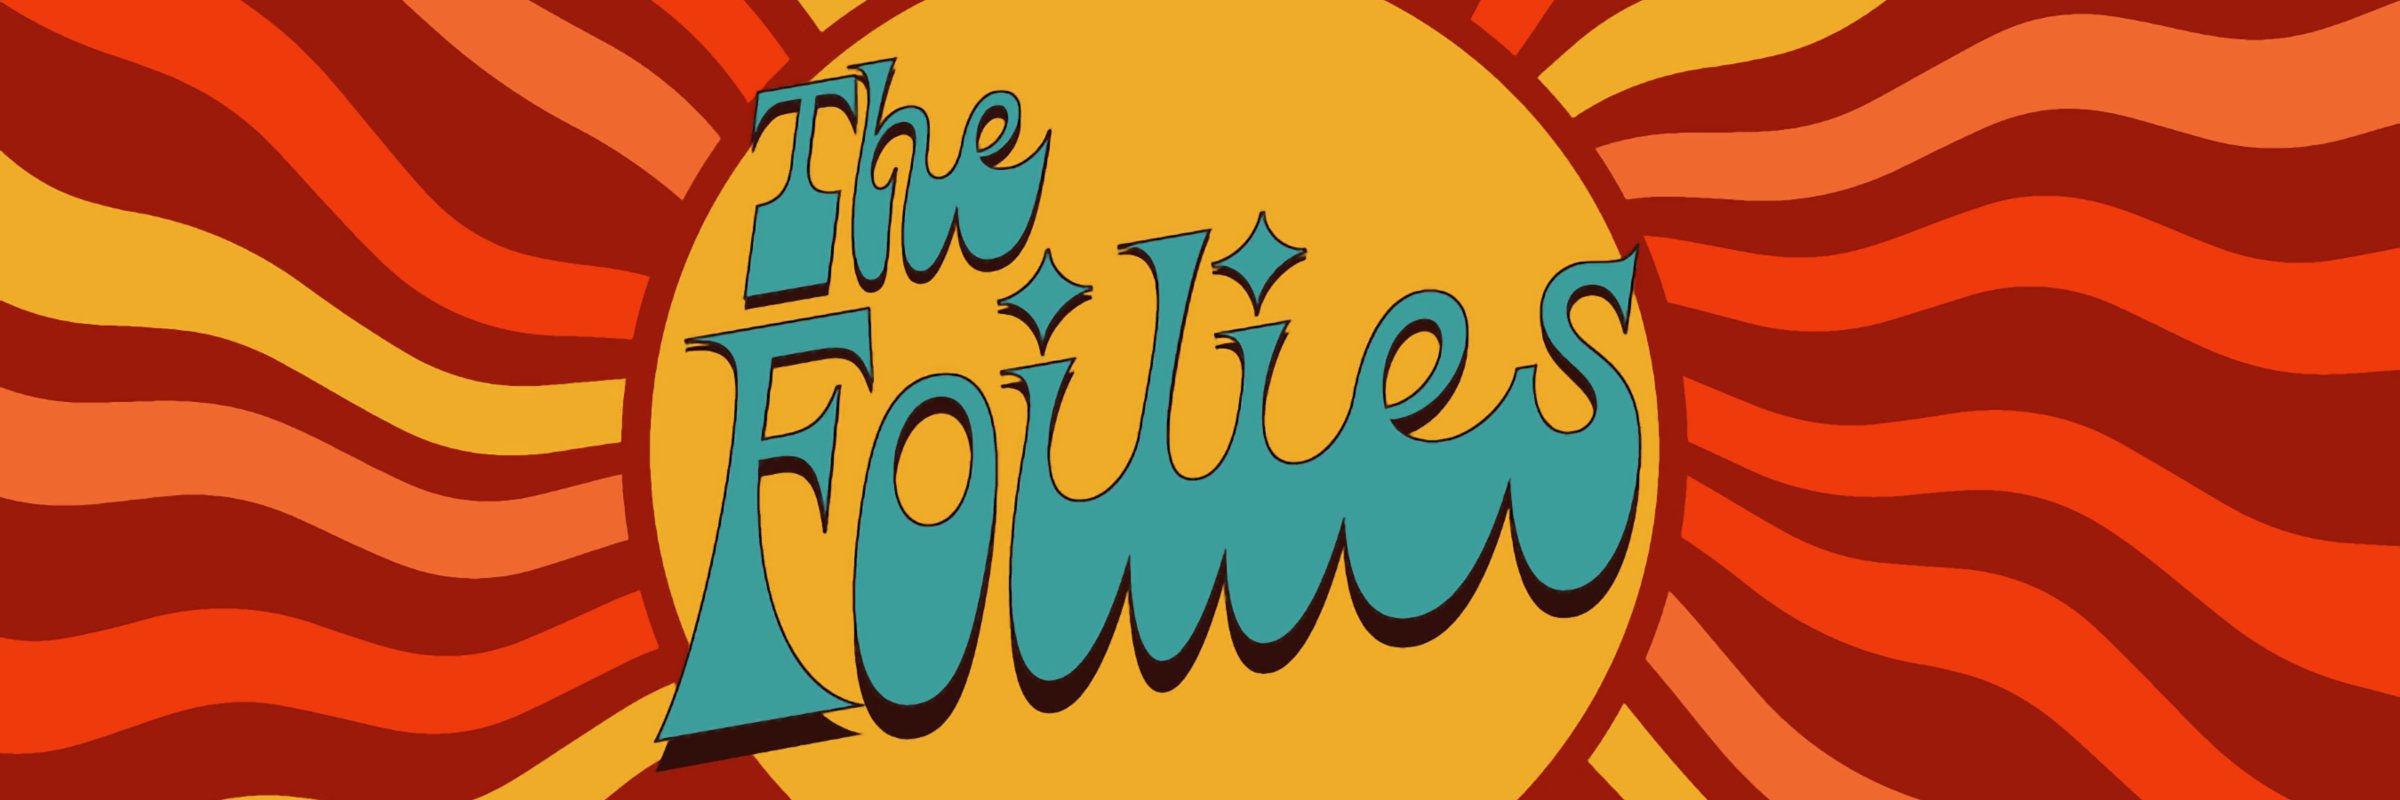 A groovy-style yellow sun on a pyschalic background that says "The Foilies"